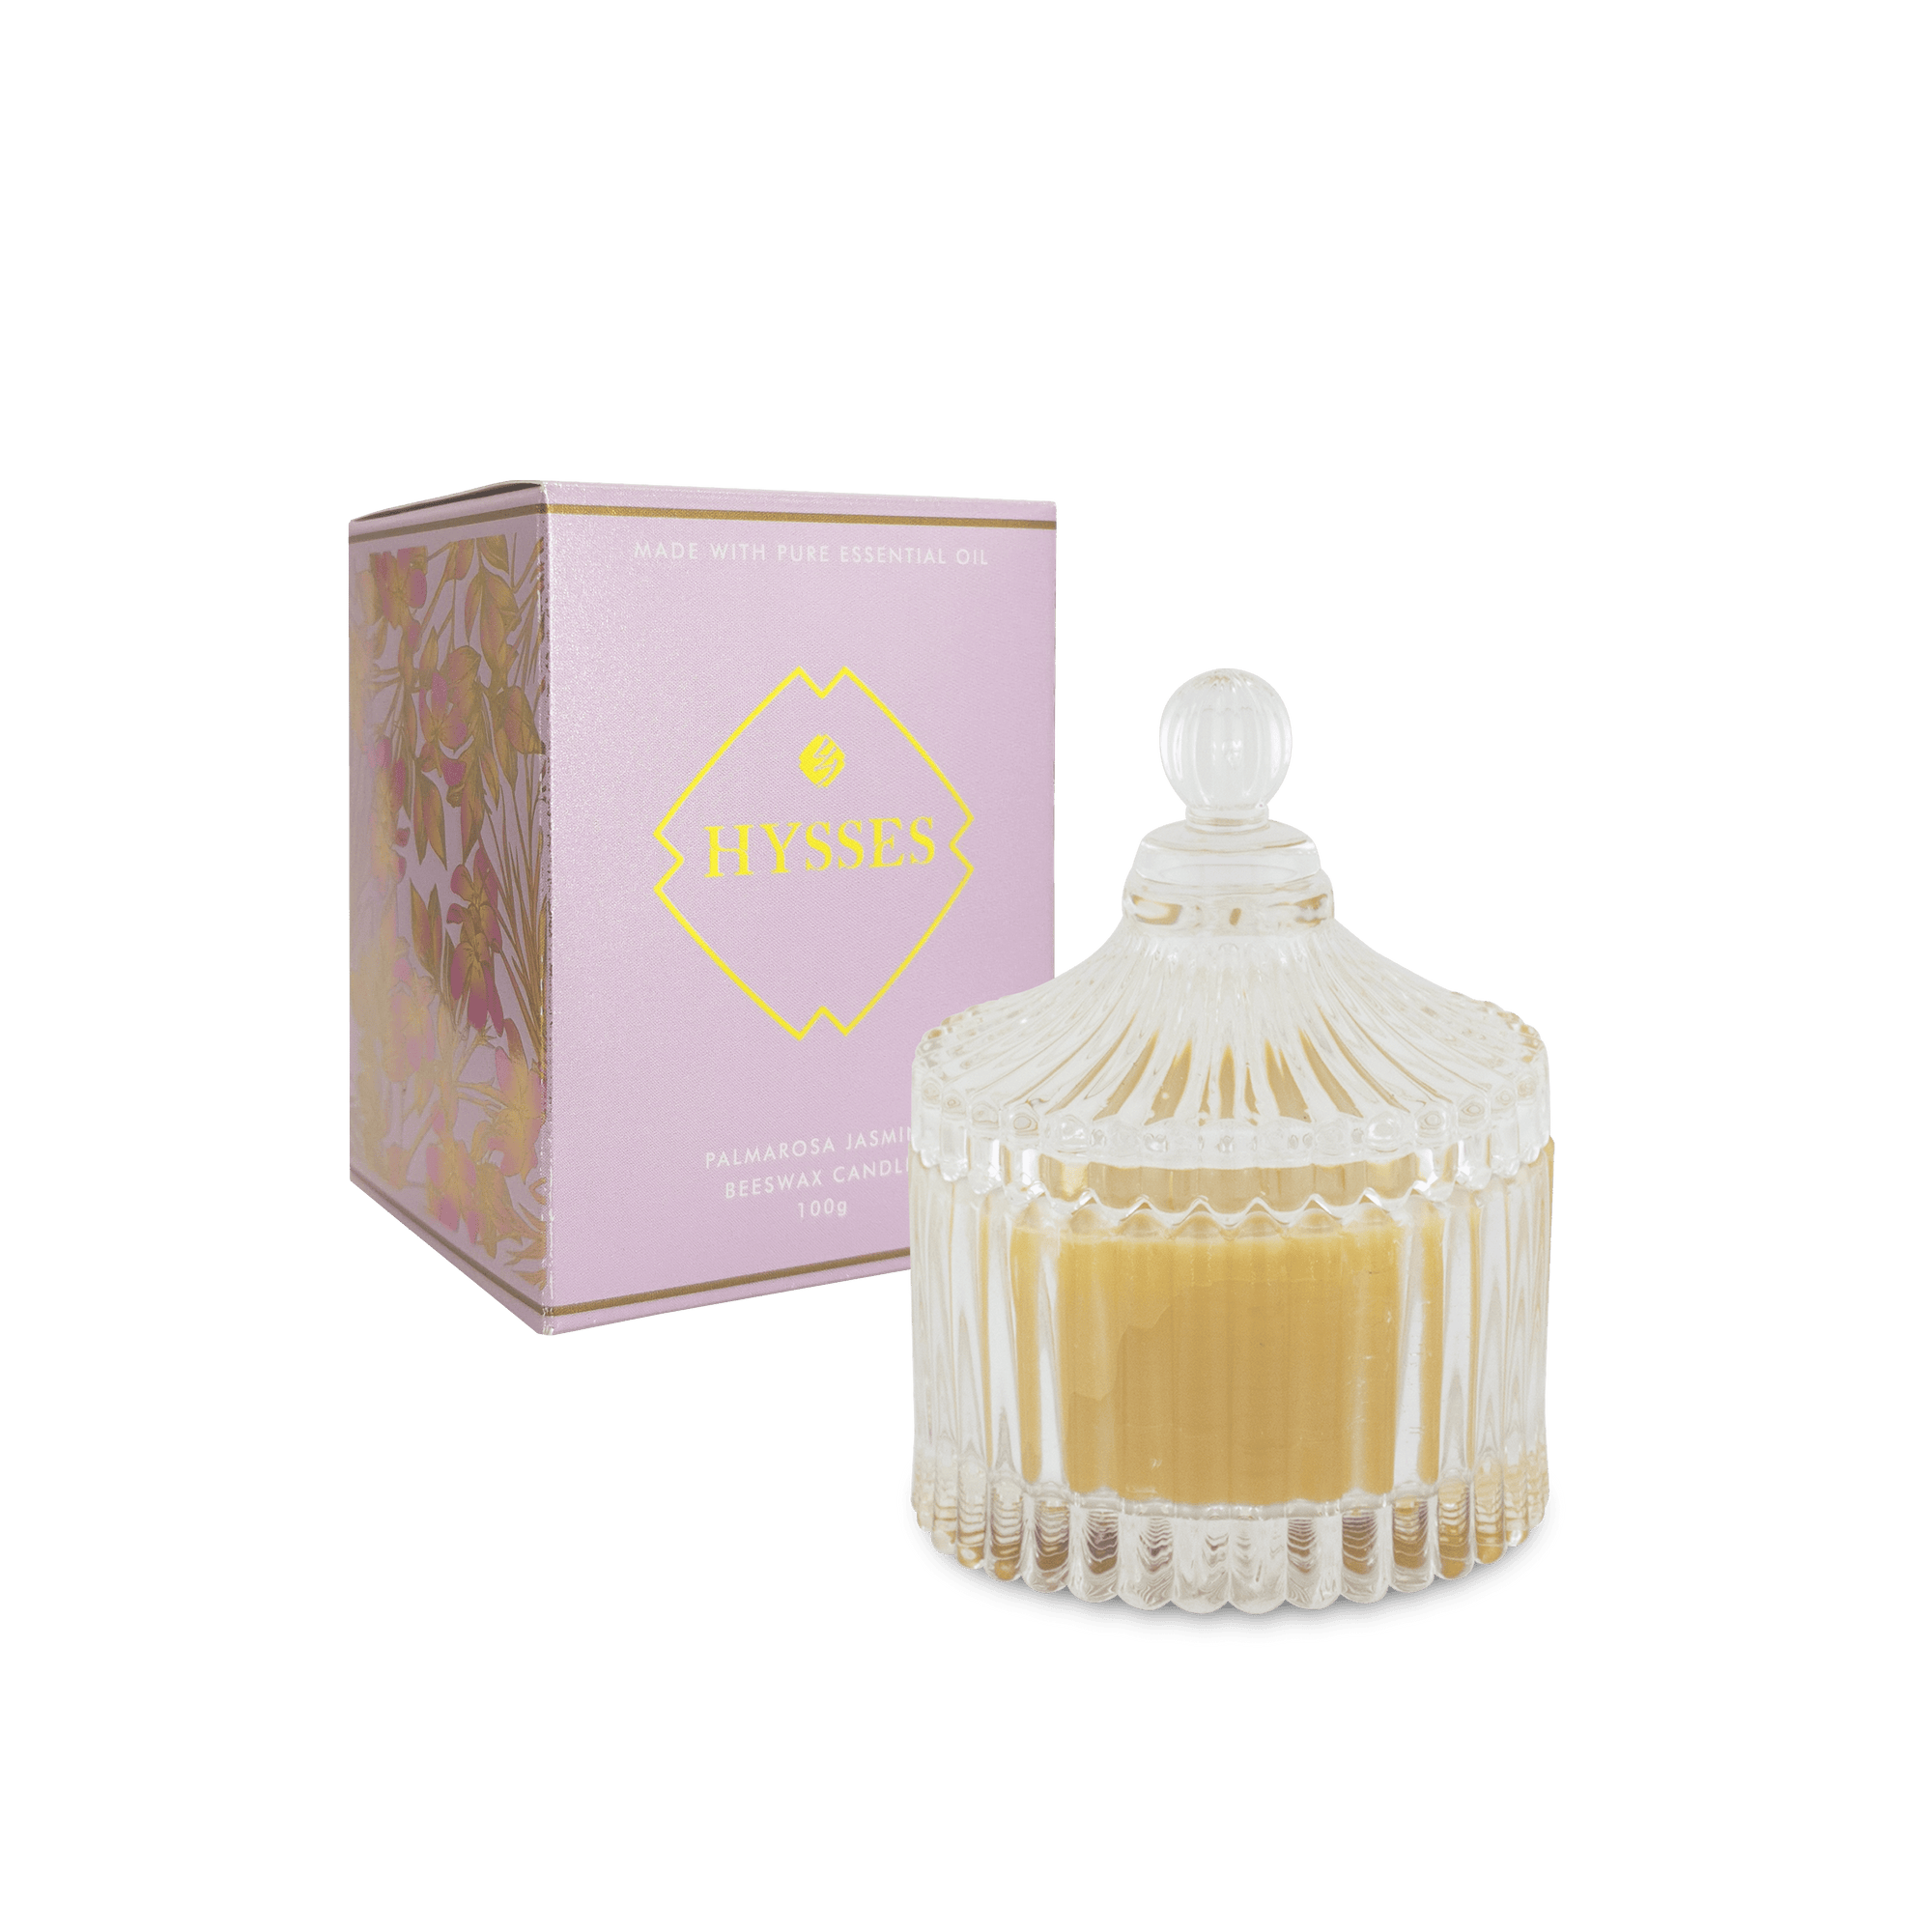 Hysses Home Scents 100g Beeswax Candle Palmarosa Jasmine